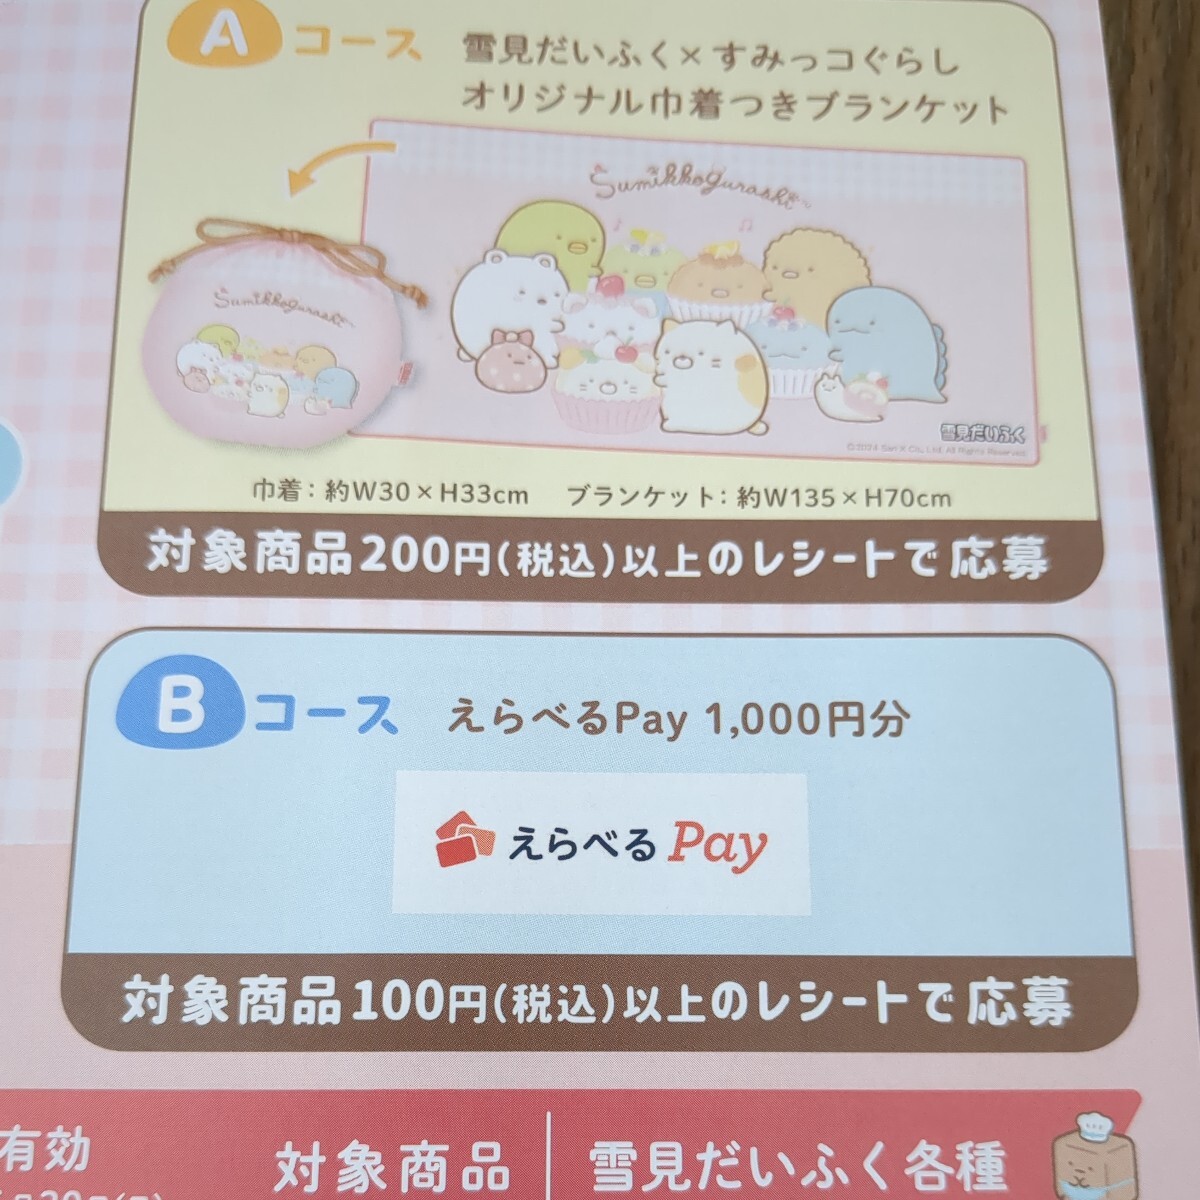 re seat prize application, is possible to choose Pay1000 jpy minute present ..! deadline 7 month 3 day, super cooperation plan 